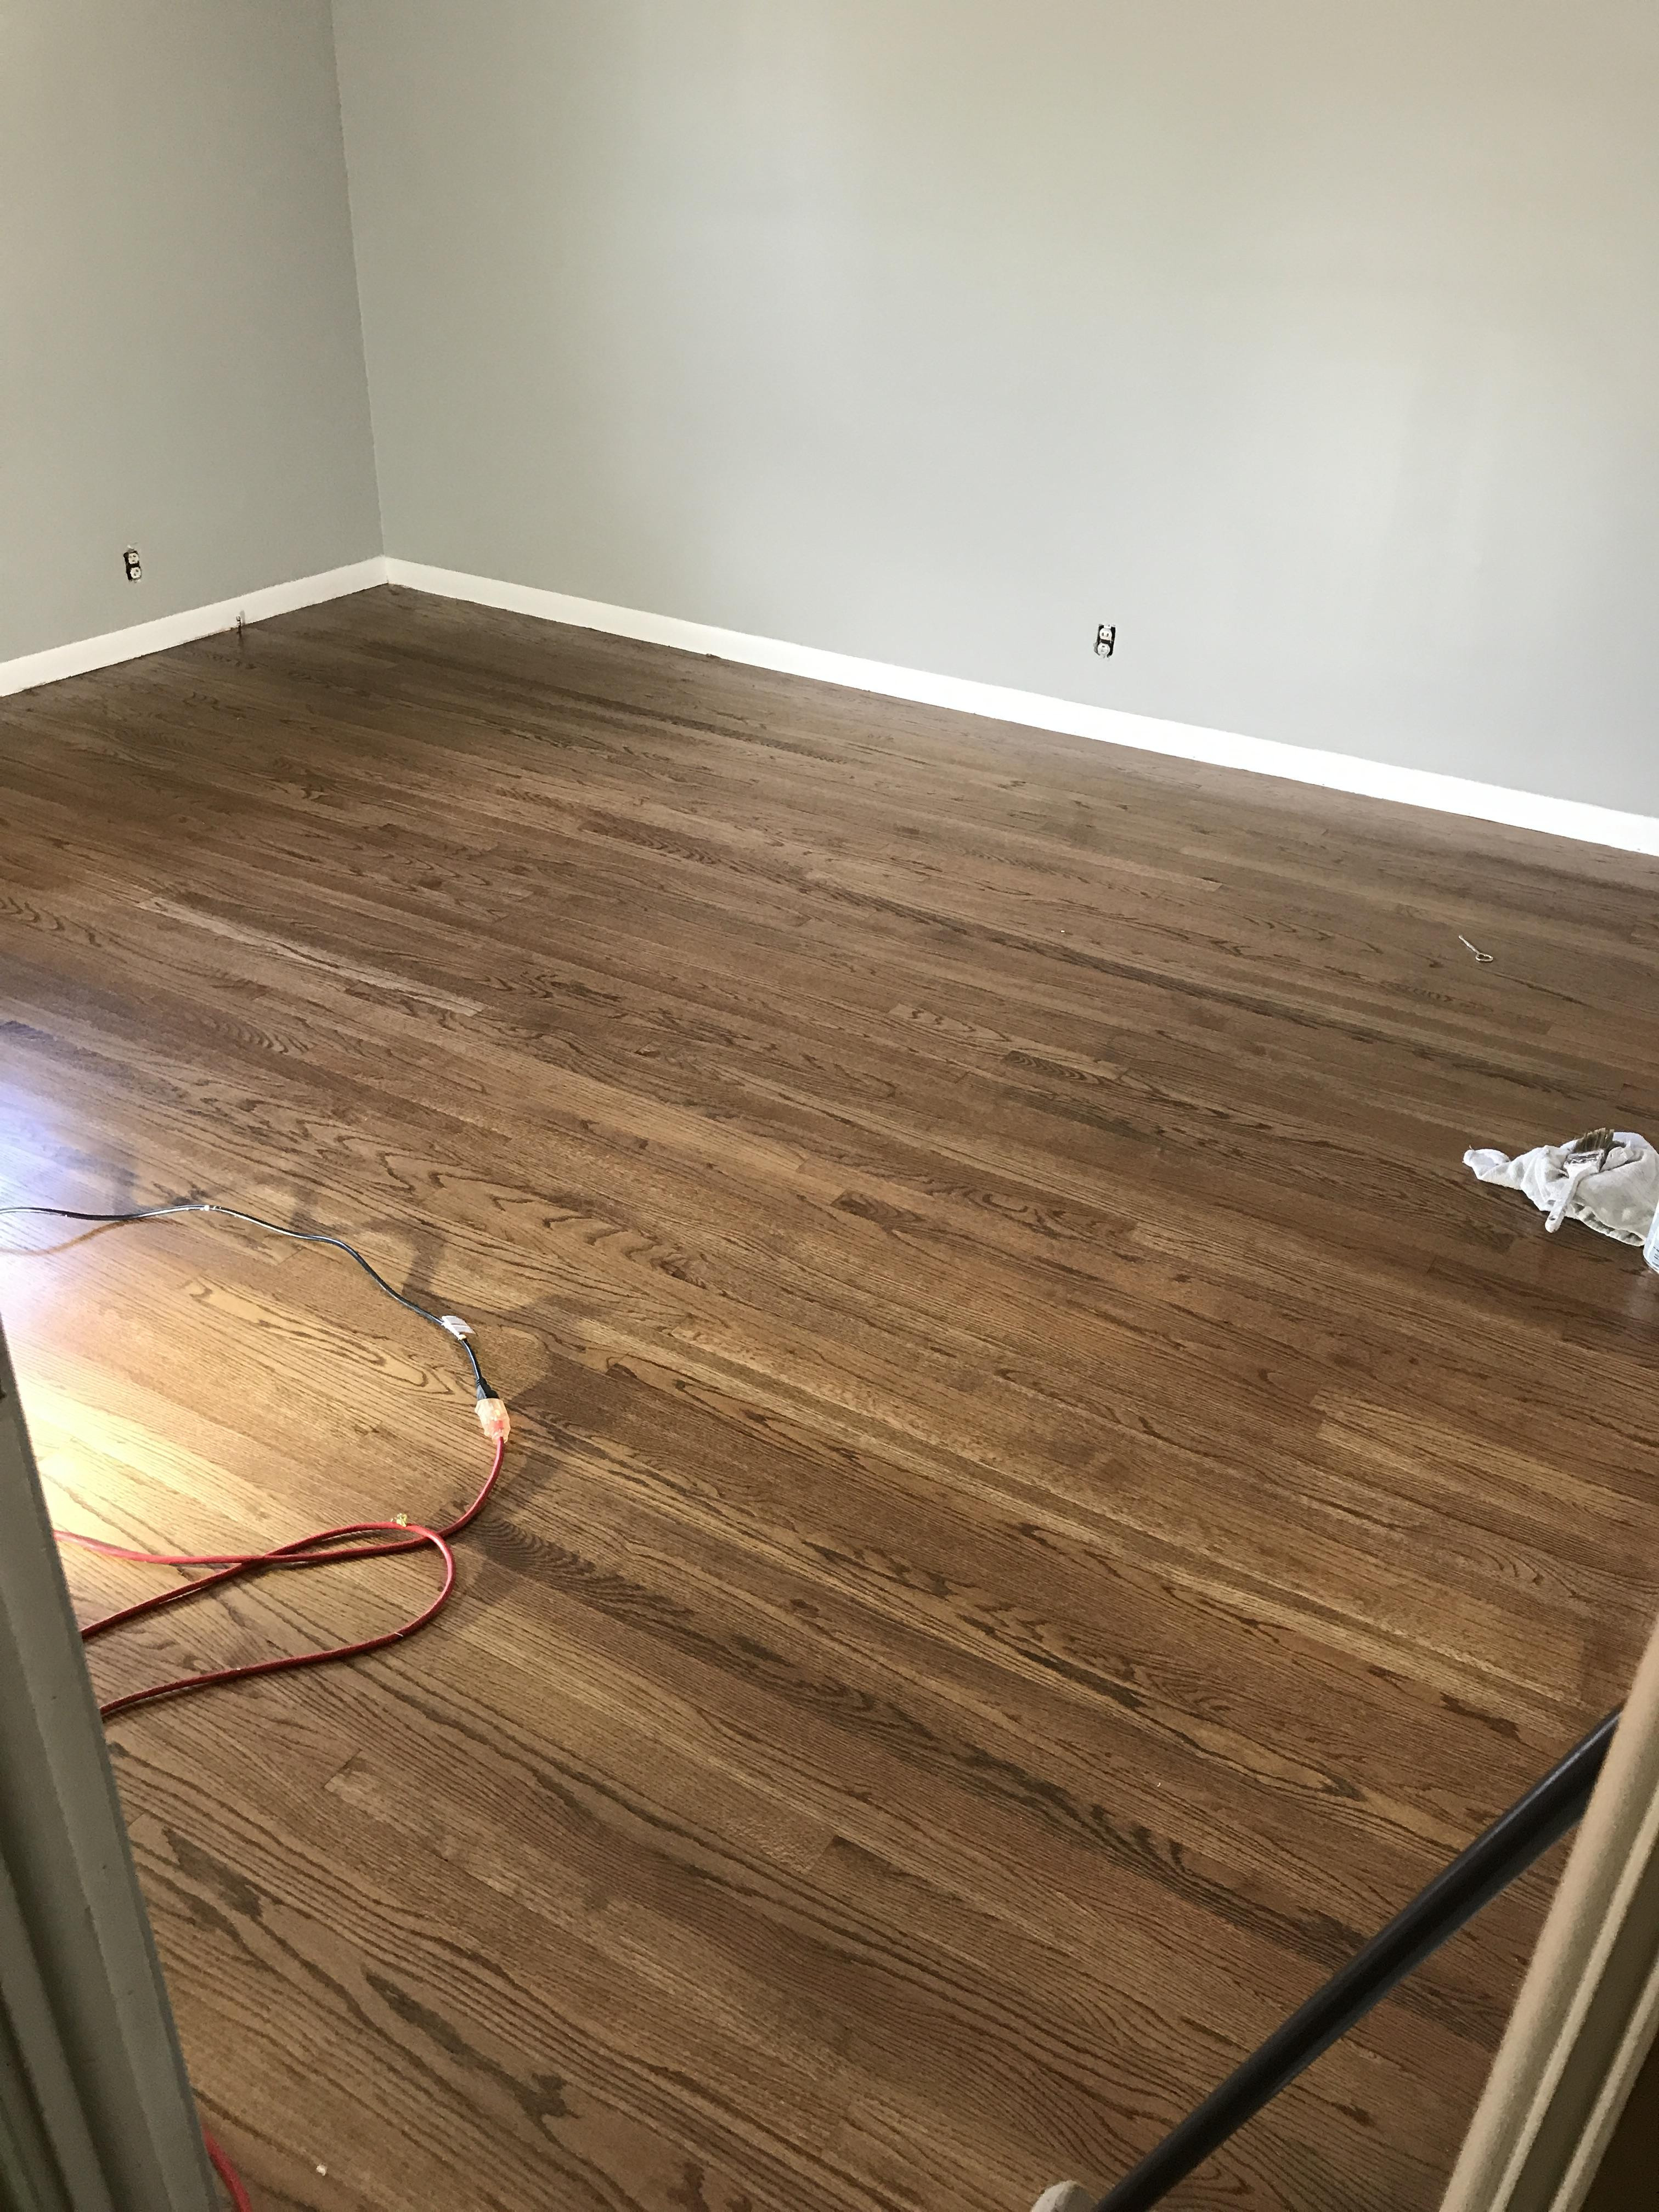 13 Great Empire Hardwood Flooring north Hollywood Ca 2024 free download empire hardwood flooring north hollywood ca of http imgur com gallery pjwzx daily http imgur com 9qq29pk with ahqmxlc